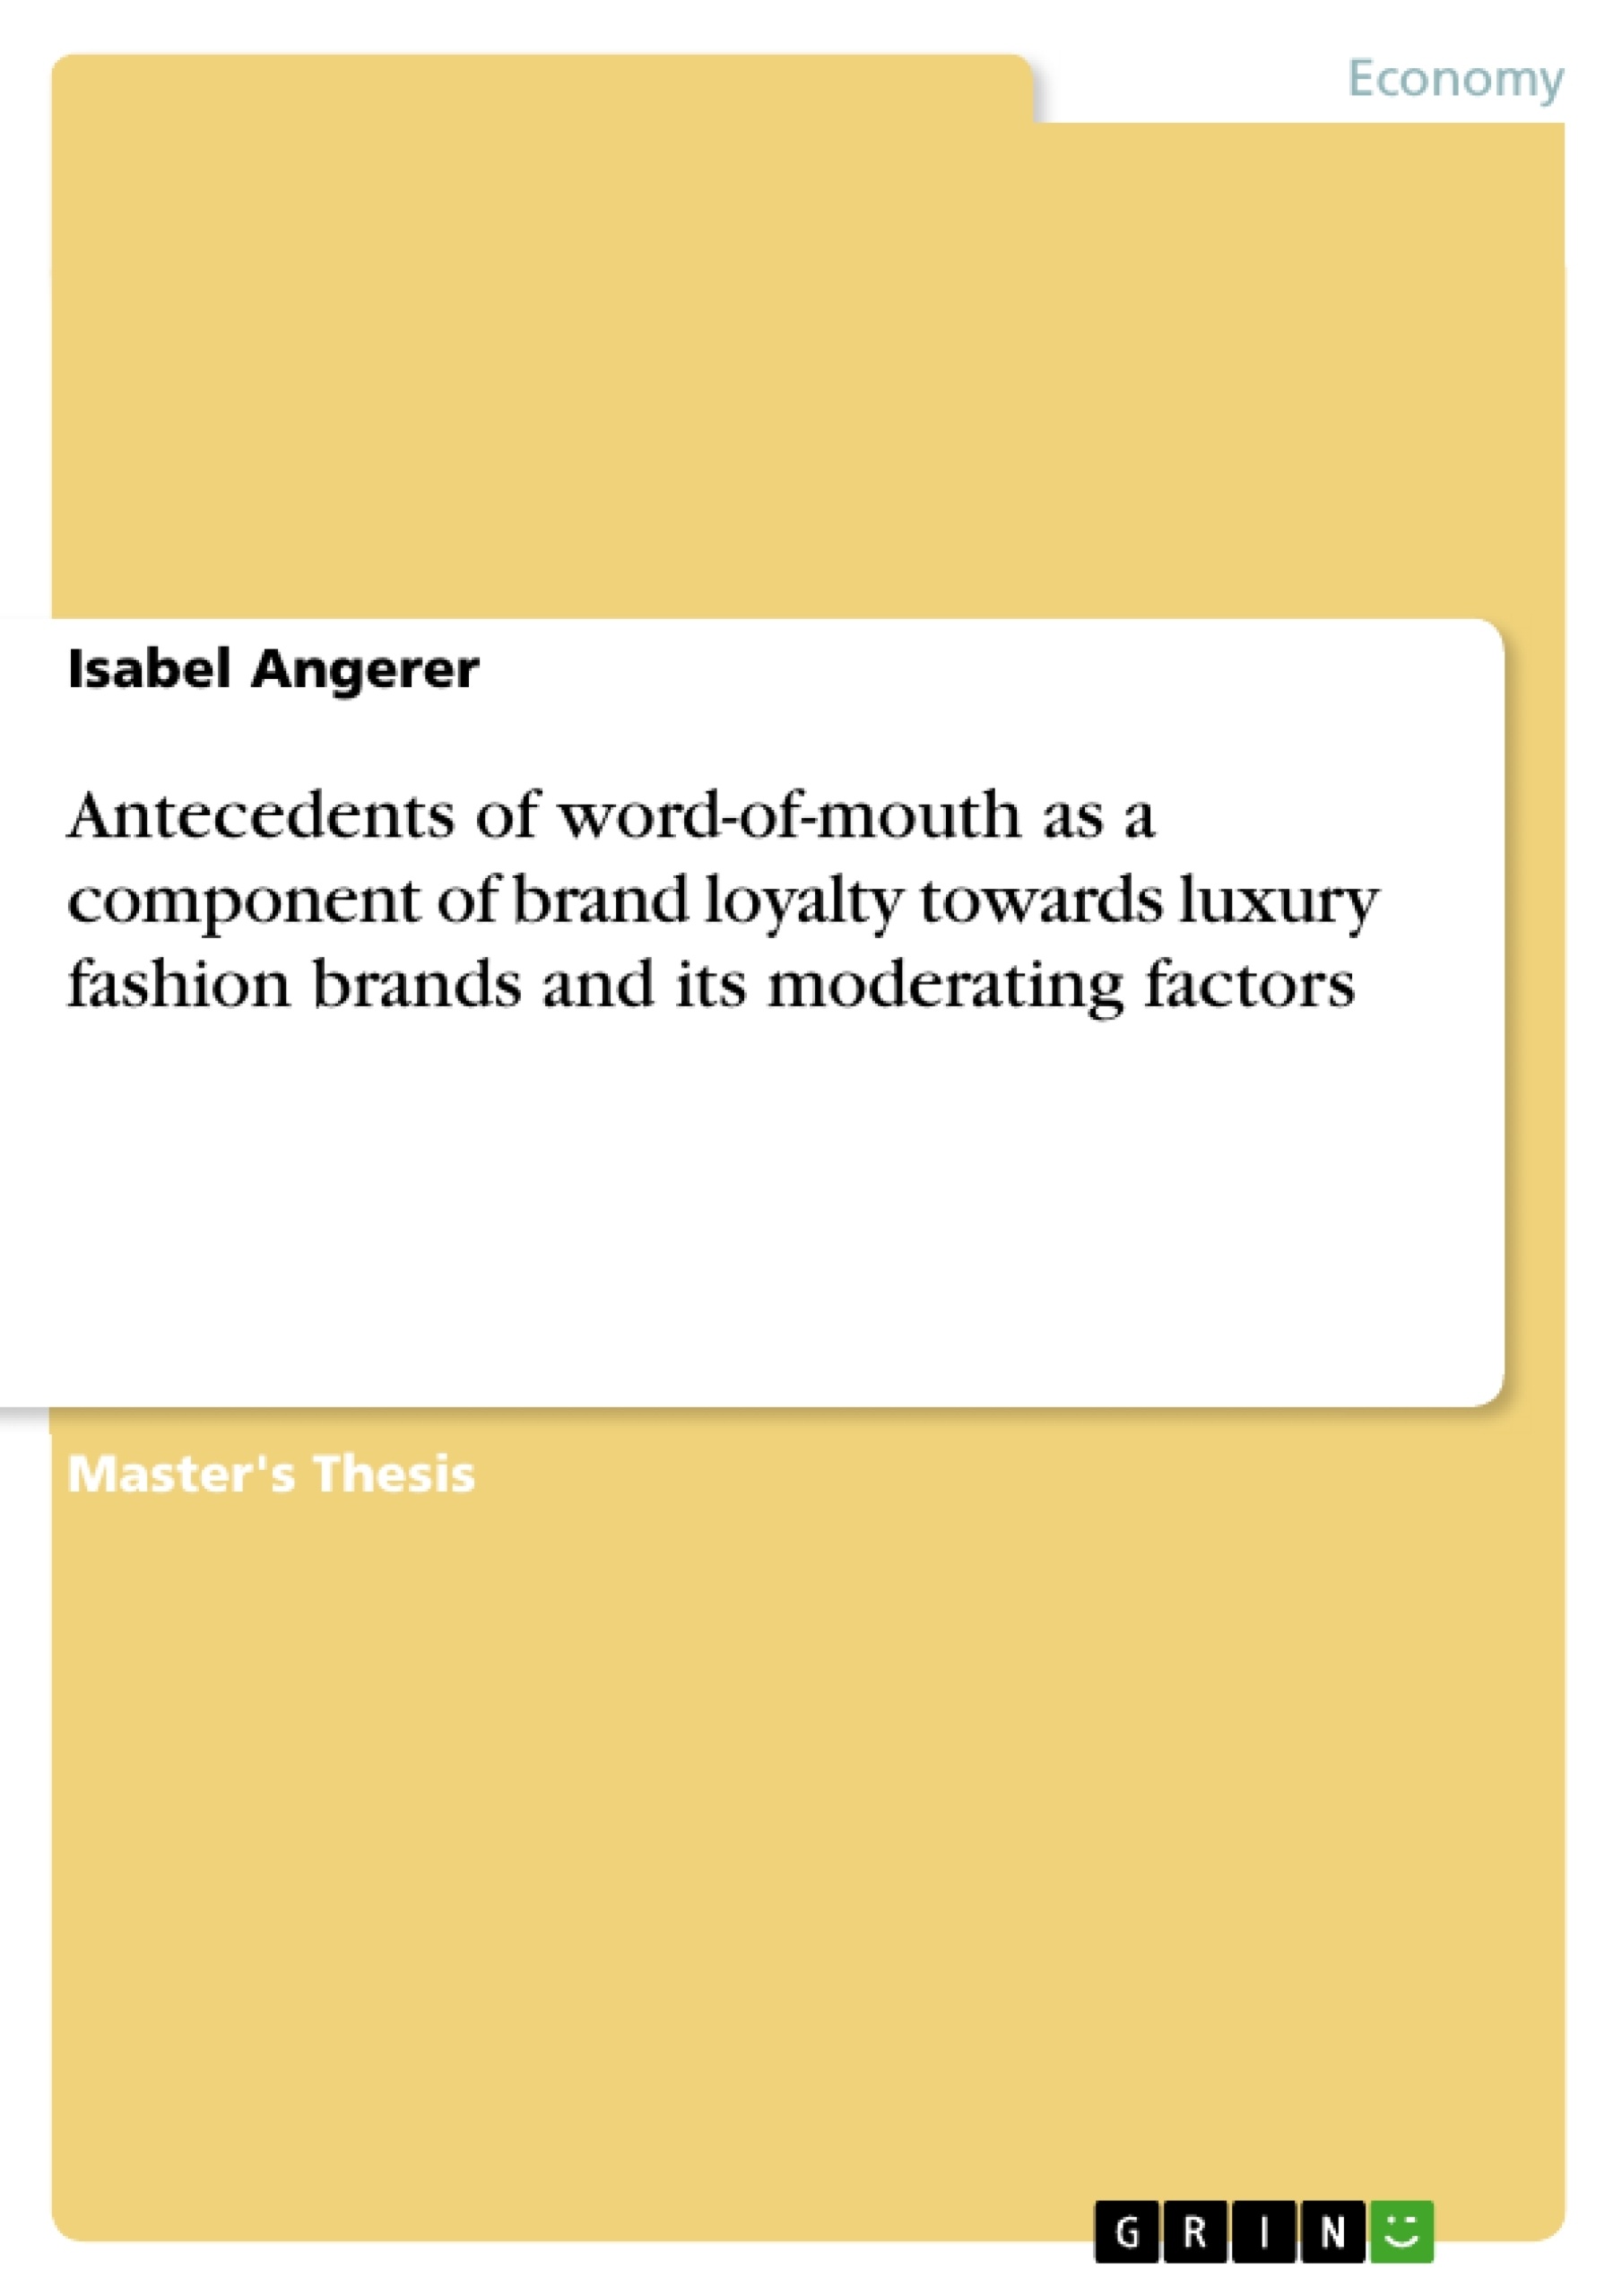 Título: Antecedents of word-of-mouth as a component of brand loyalty towards luxury fashion brands and its moderating factors